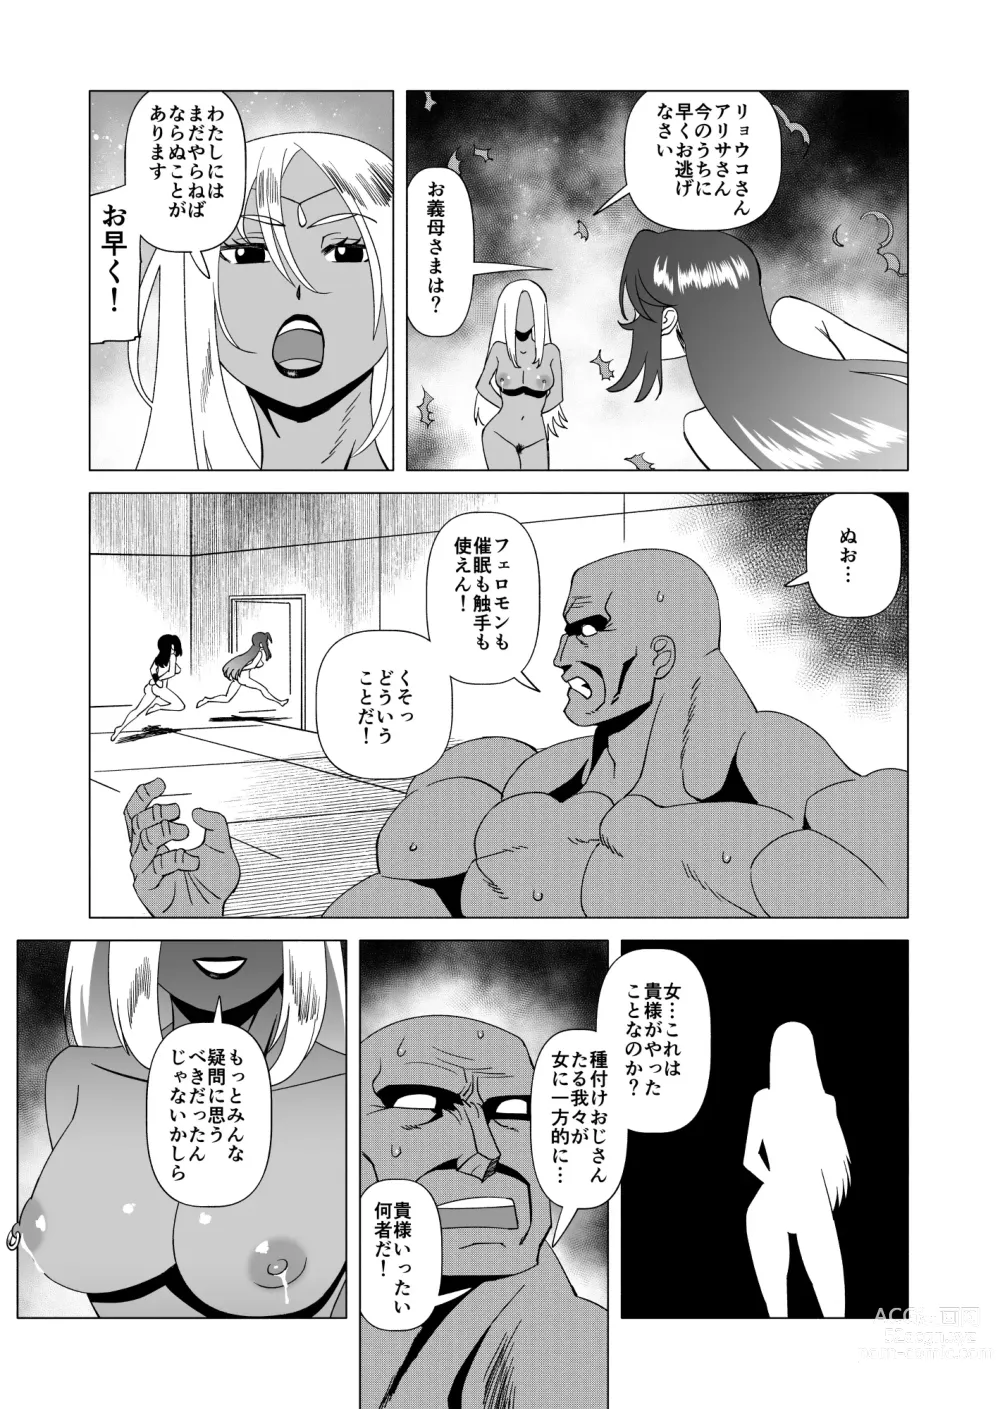 Page 30 of doujinshi CASTRATER 4